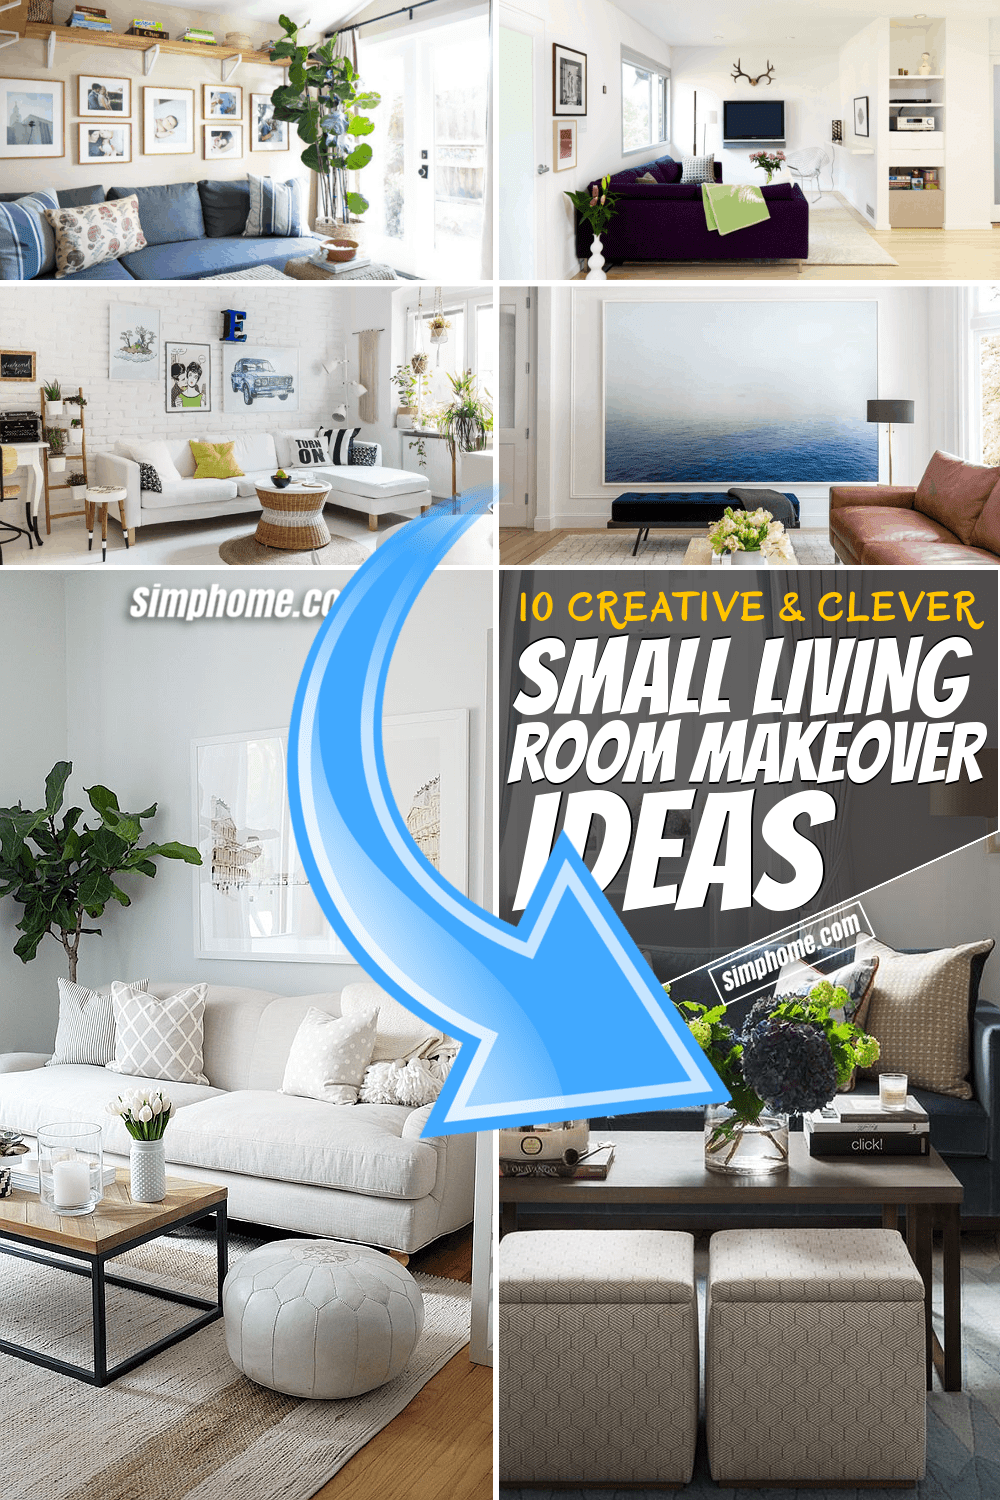 Simphome.com 10 Small Living Room Makeover Ideas Pinterest Featured Image